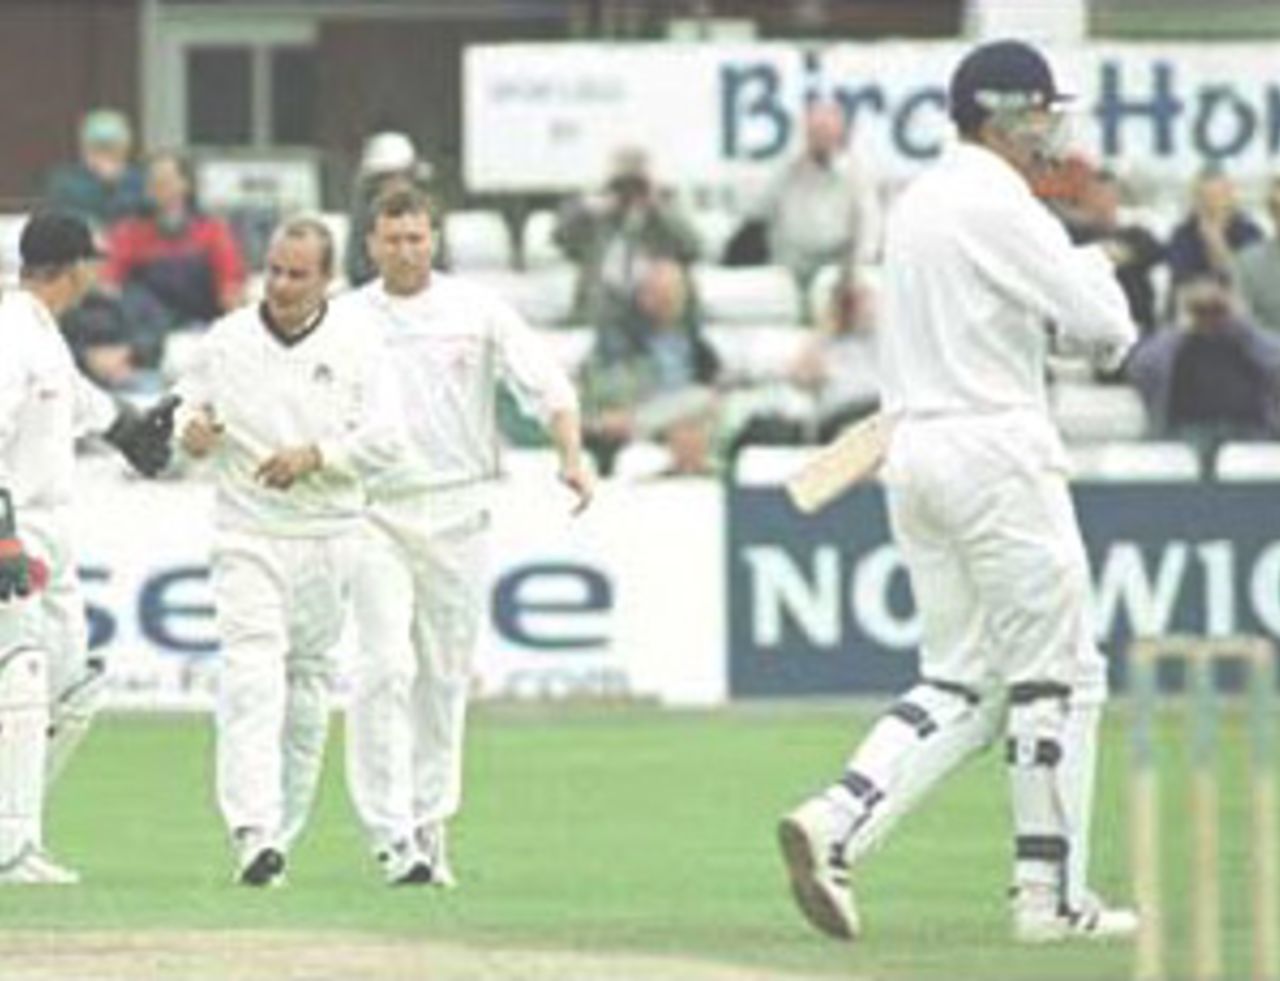 Graham Lloyd congratulated by teammates after catching Stubbings, PPP healthcare County Championship Division One, 2000, Derbyshire v Lancashire, County Ground, Derby, 07-10 July 2000 (Day 3).